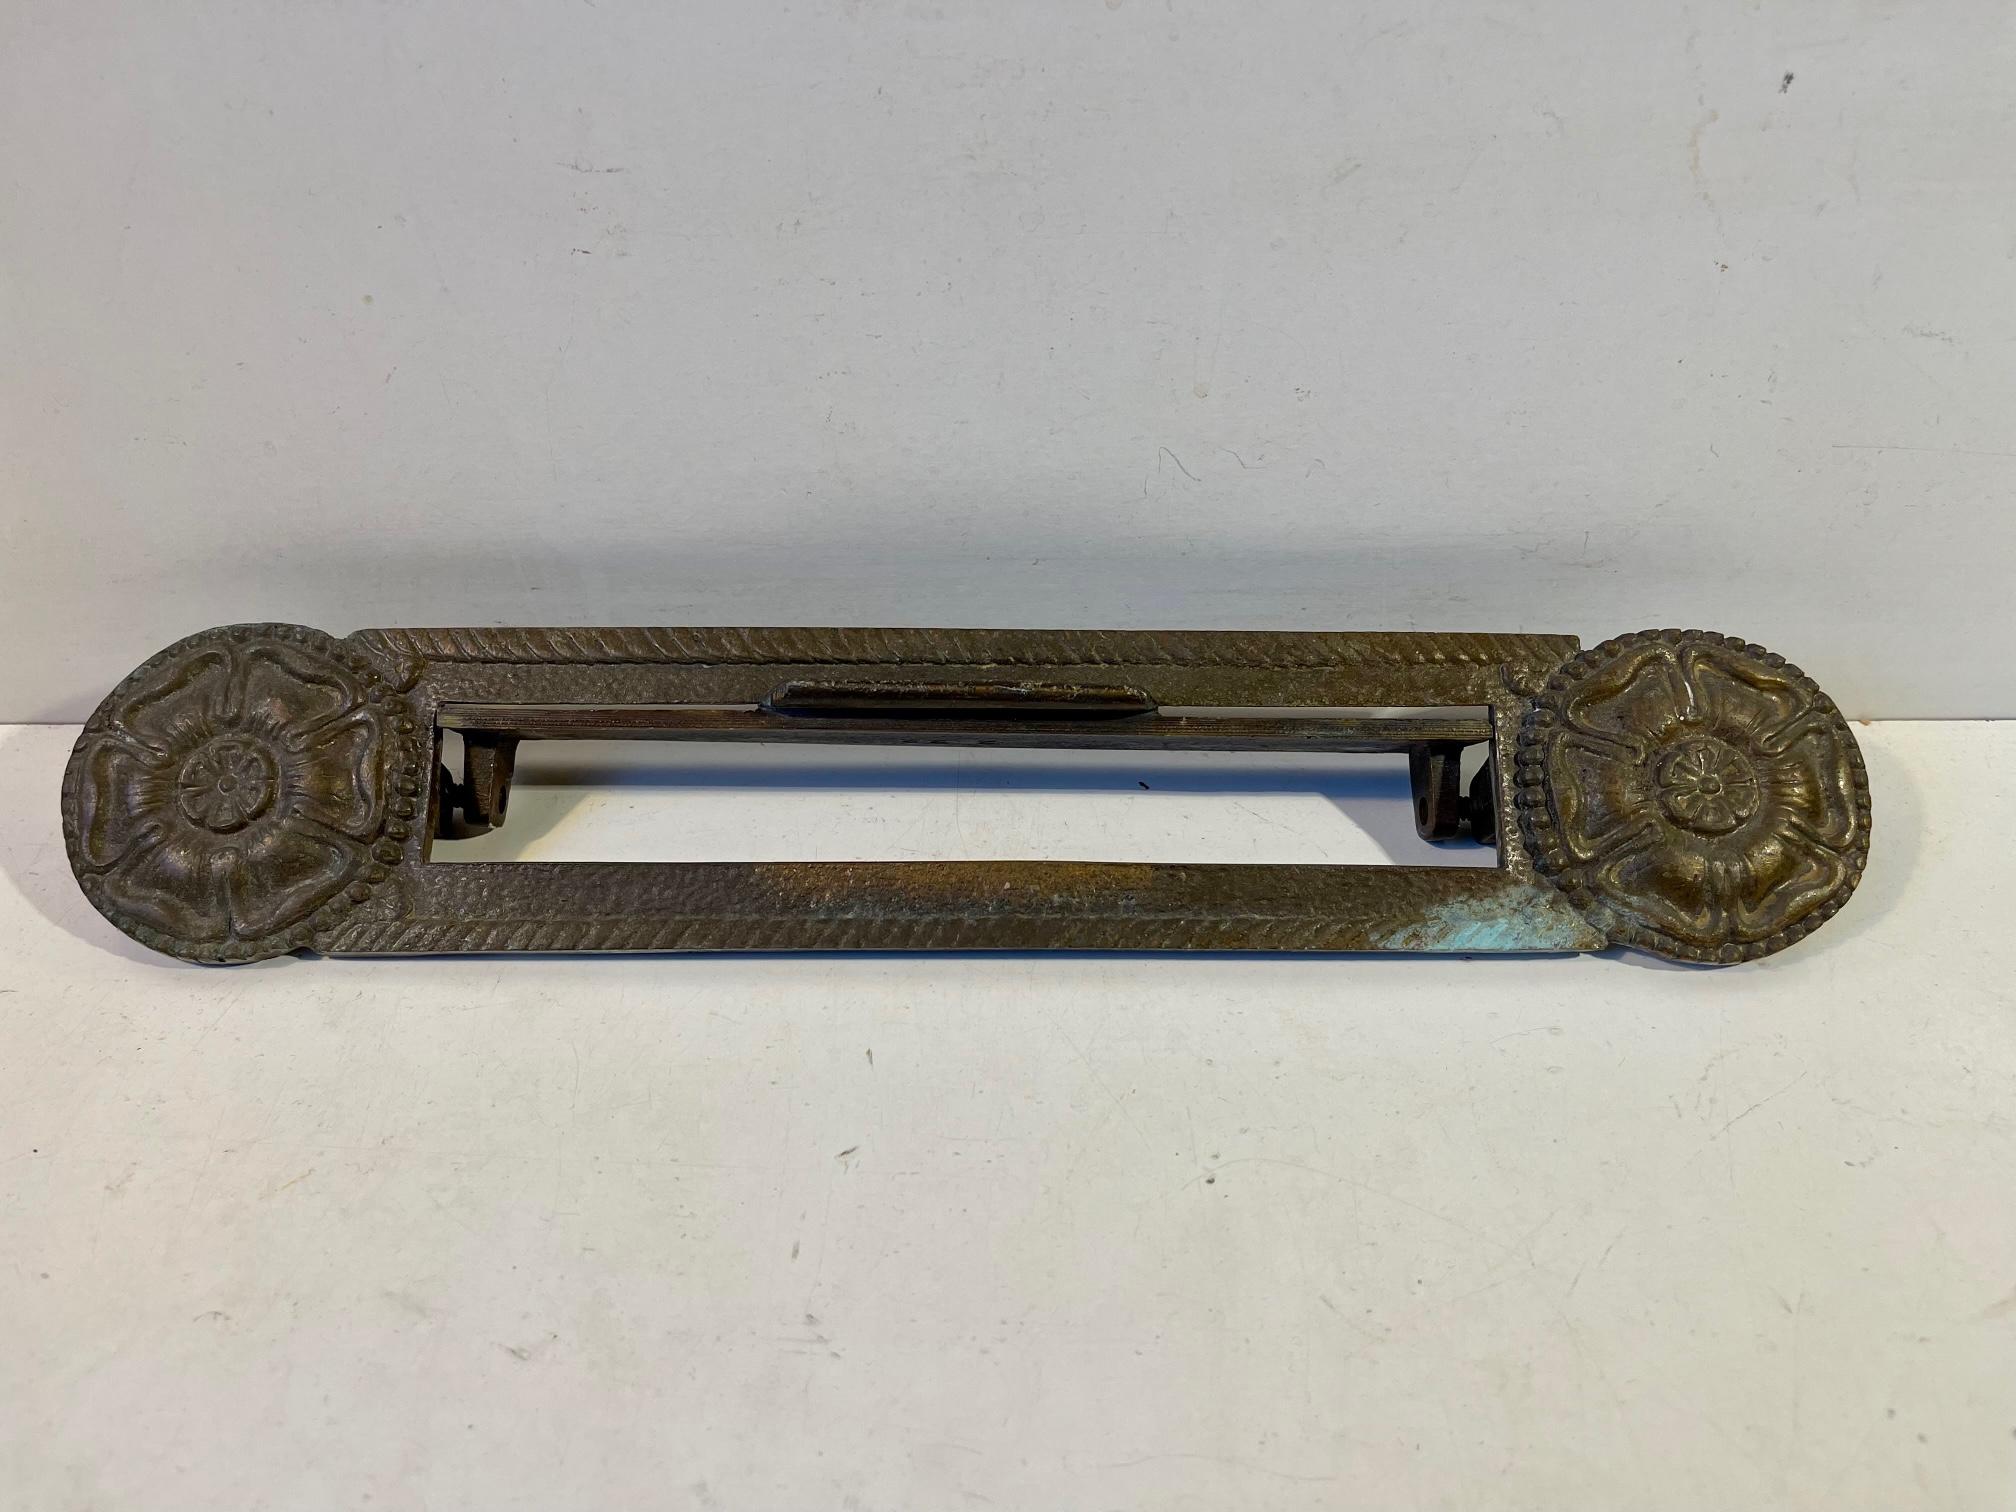 Old wide letter slot in patinated bronze. Manufactured in Denmark circa 1920. Wellkept and mechanically sound condition. Rock solid. Measurements: W: 31.5 cm, H: 6 cm.